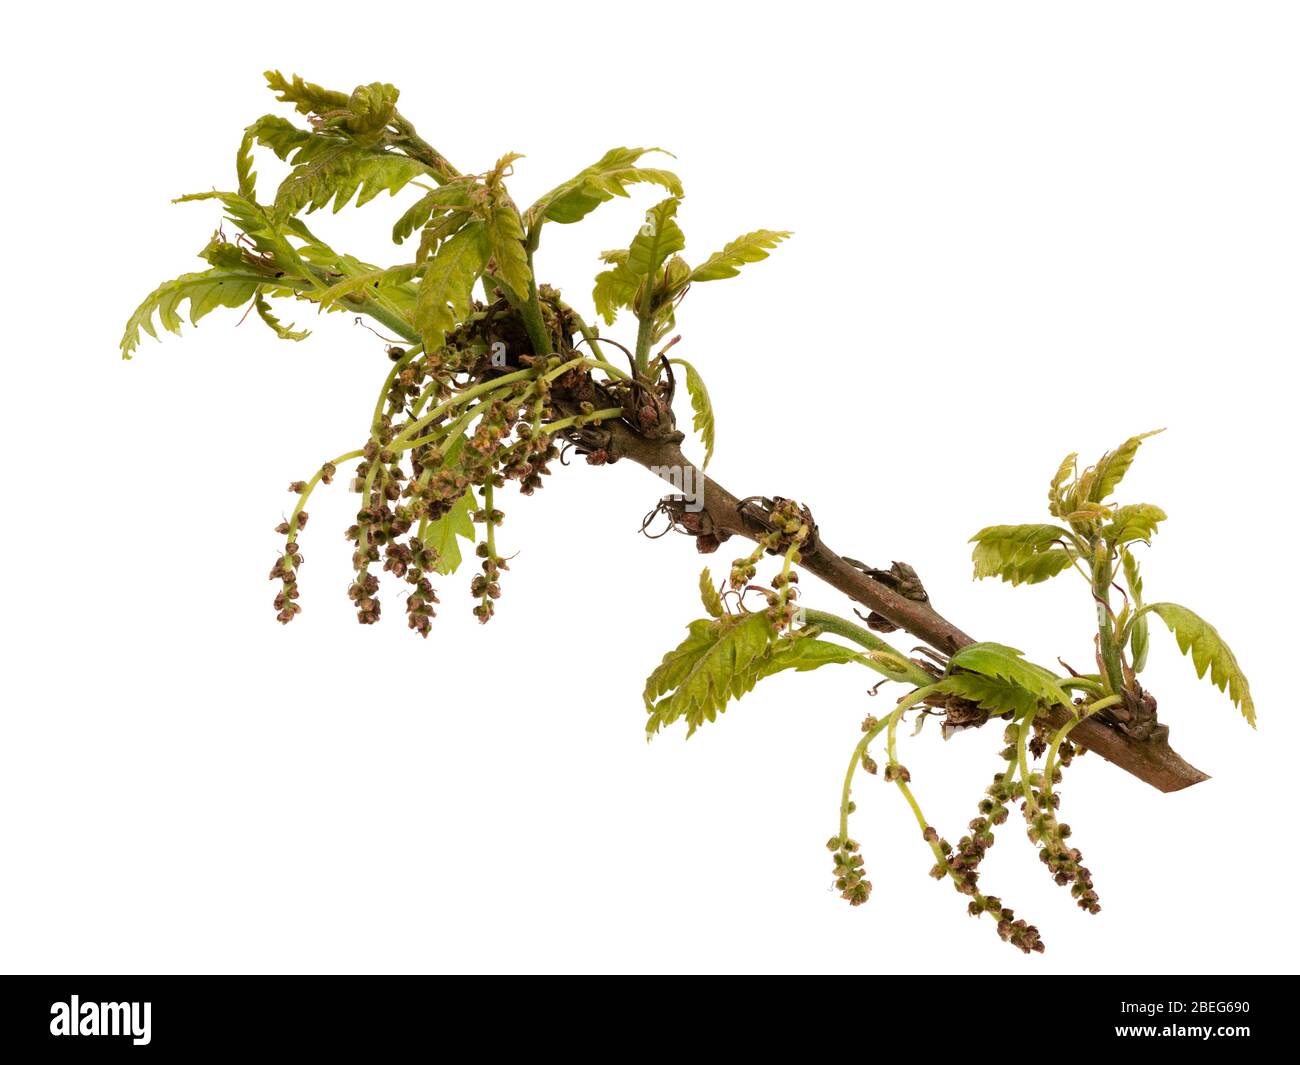 Emerging foliage and wind pollinated flowers of the UK native sessile oak, Quercus petraea, on a white background Stock Photo